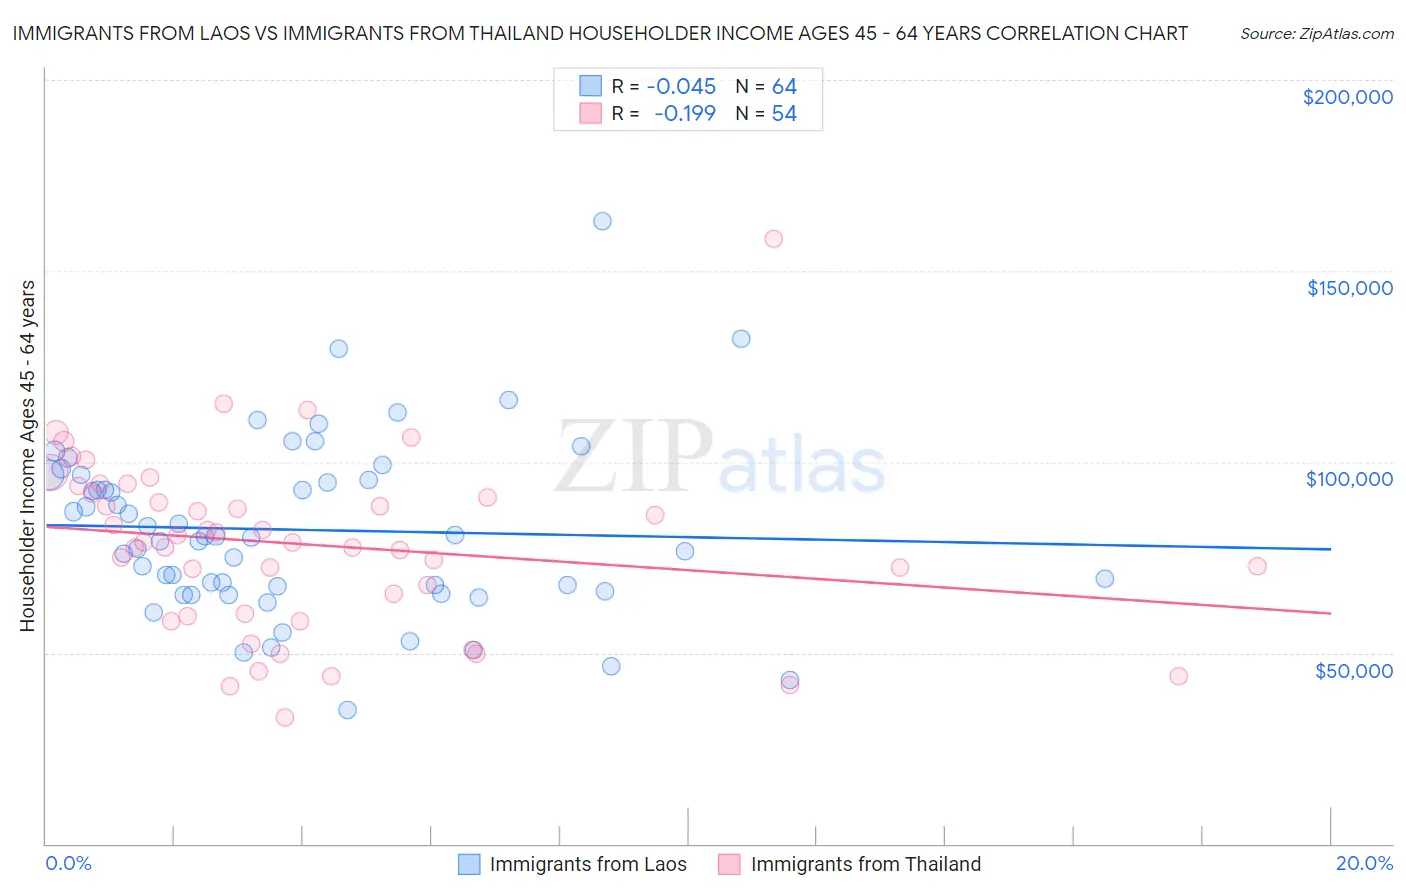 Immigrants from Laos vs Immigrants from Thailand Householder Income Ages 45 - 64 years